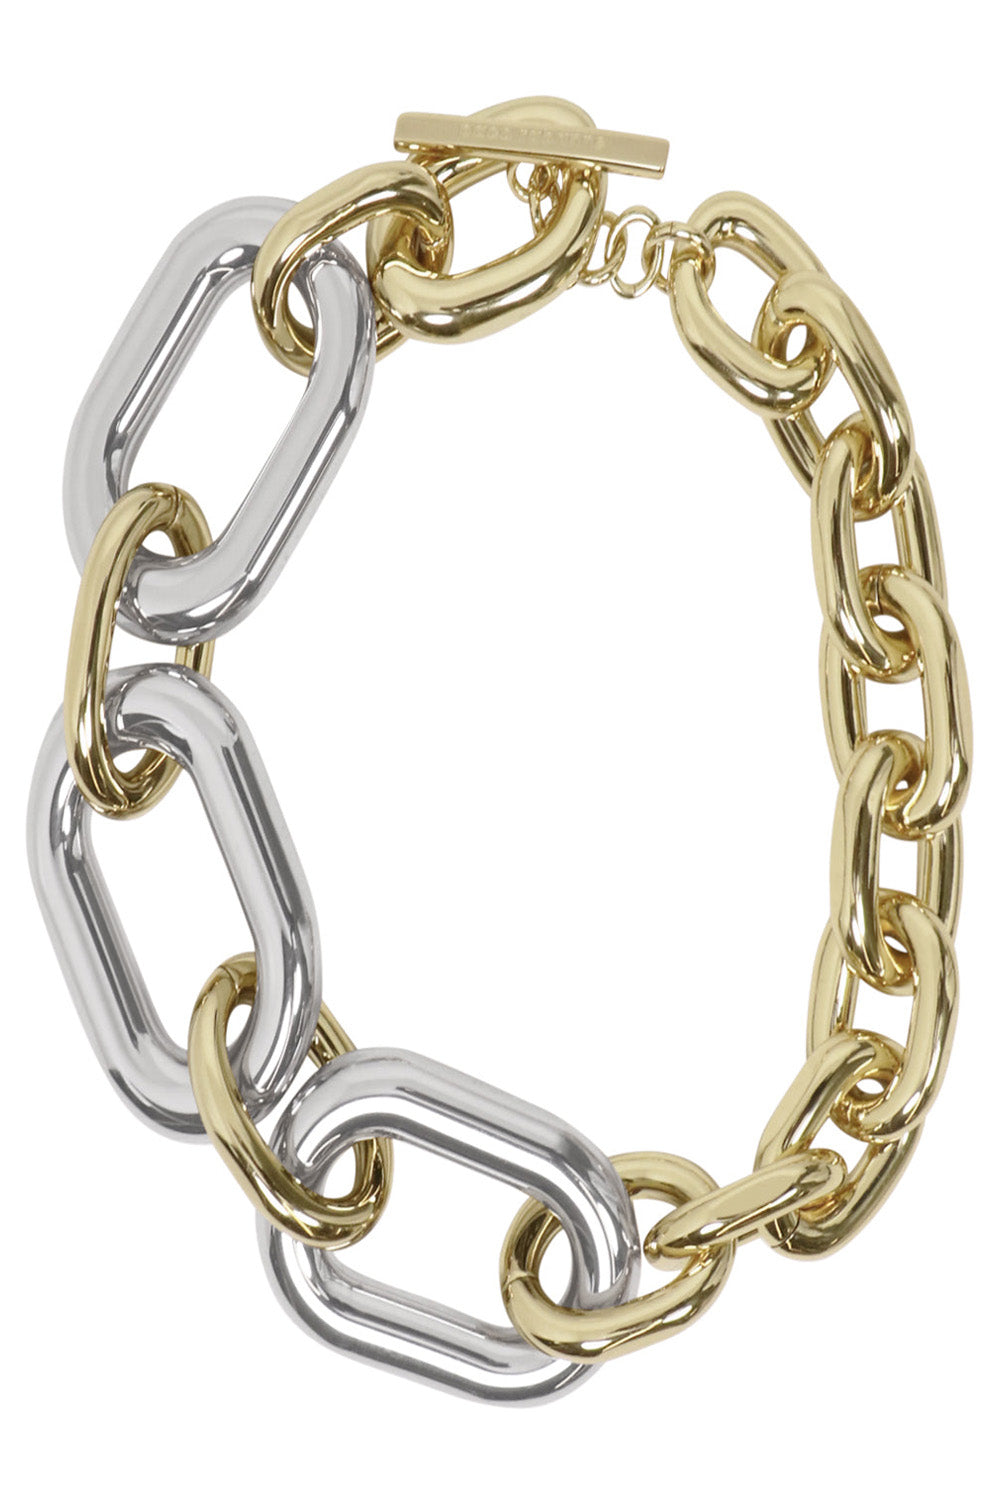 PACO RABANNE ACCESSORIES MULTI XL CONTRAST LINK NECKLACE | GOLD/SILVER